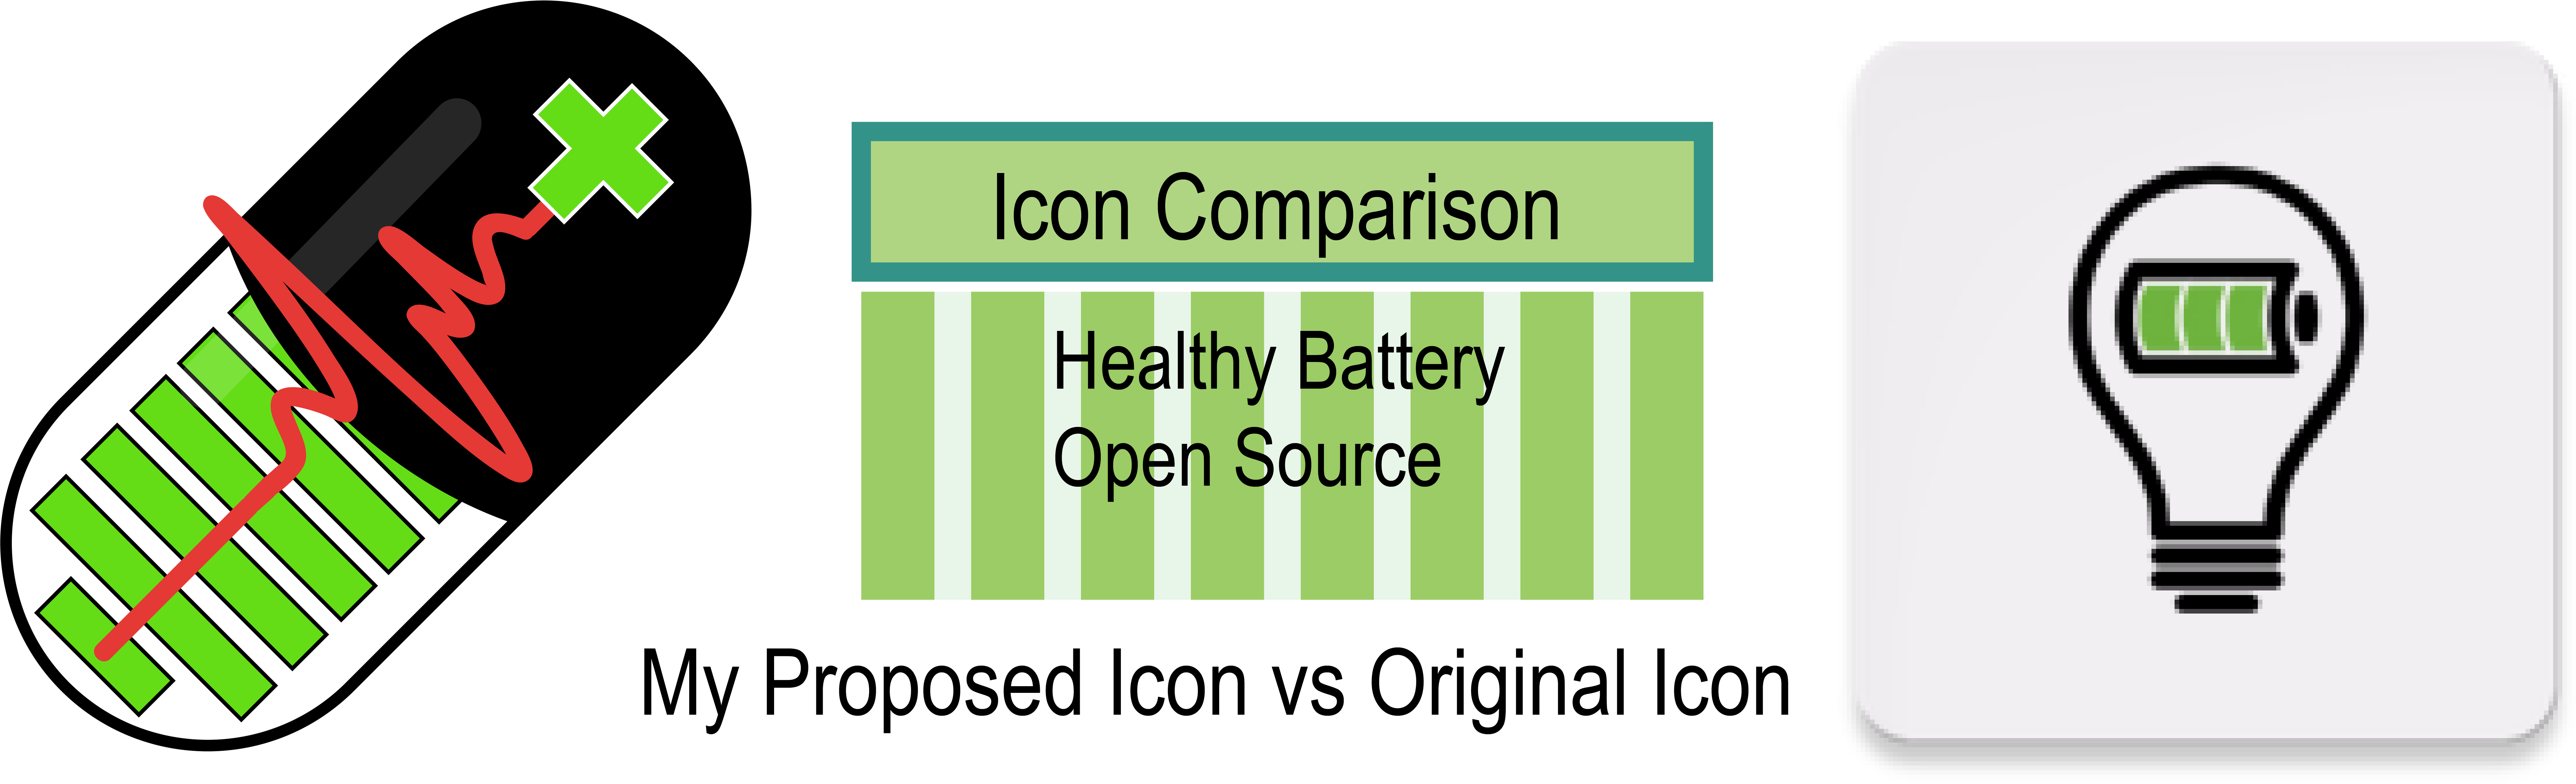 Download Icon Comparison Shl23 Aquos Phone Serie スマホケース Au エーユー セリエ ユニーク Png Image With No Background Pngkey Com